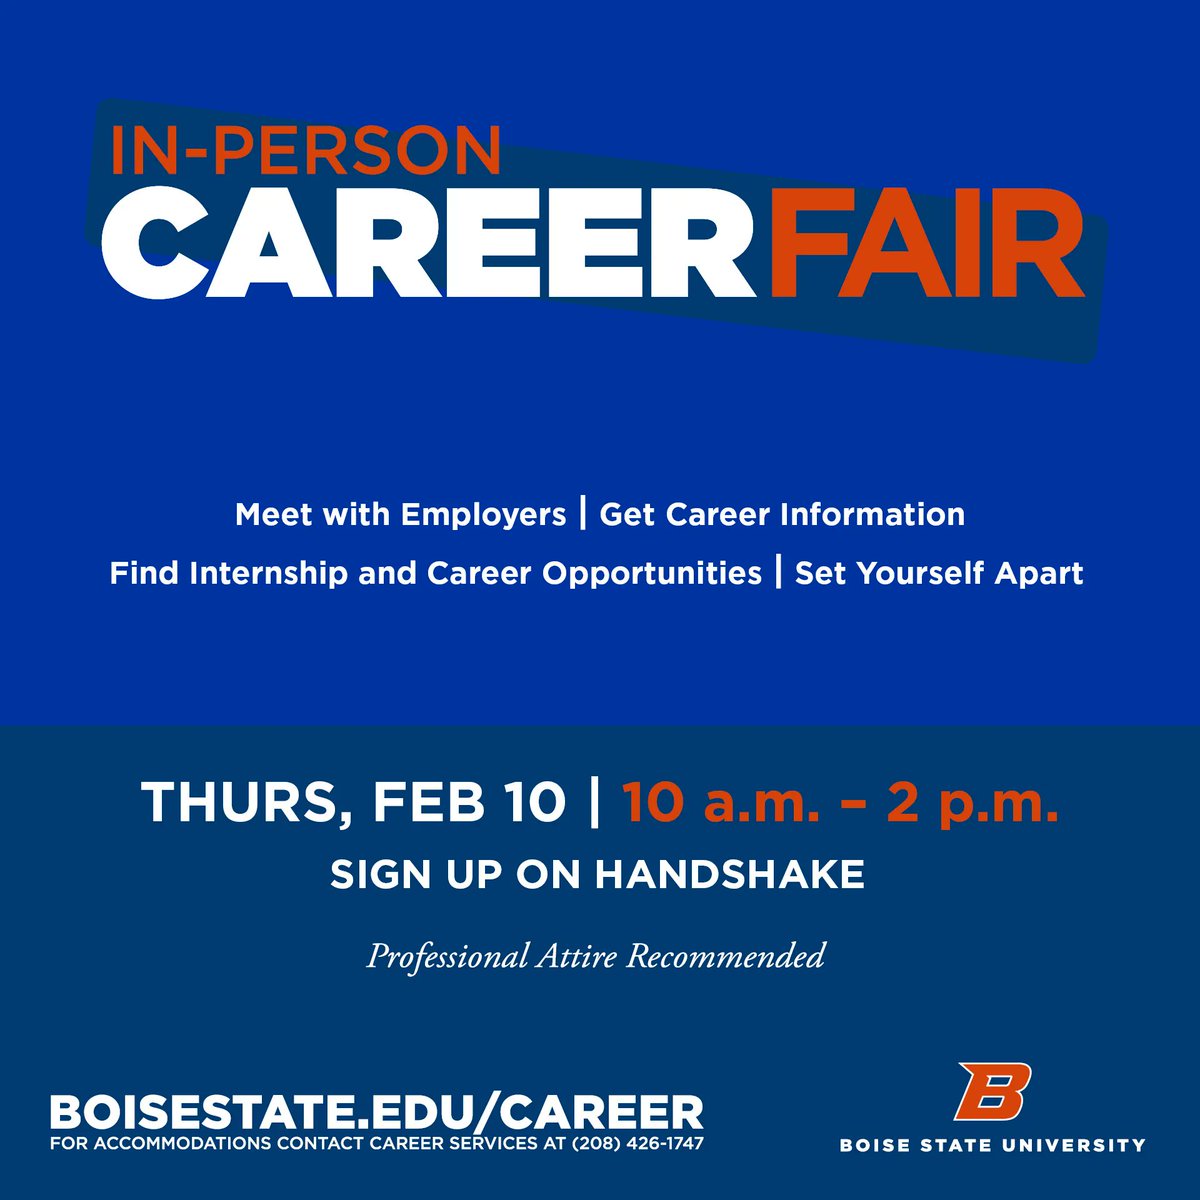 See you tomorrow at the Career Fair! #hireboisestate #broncohired